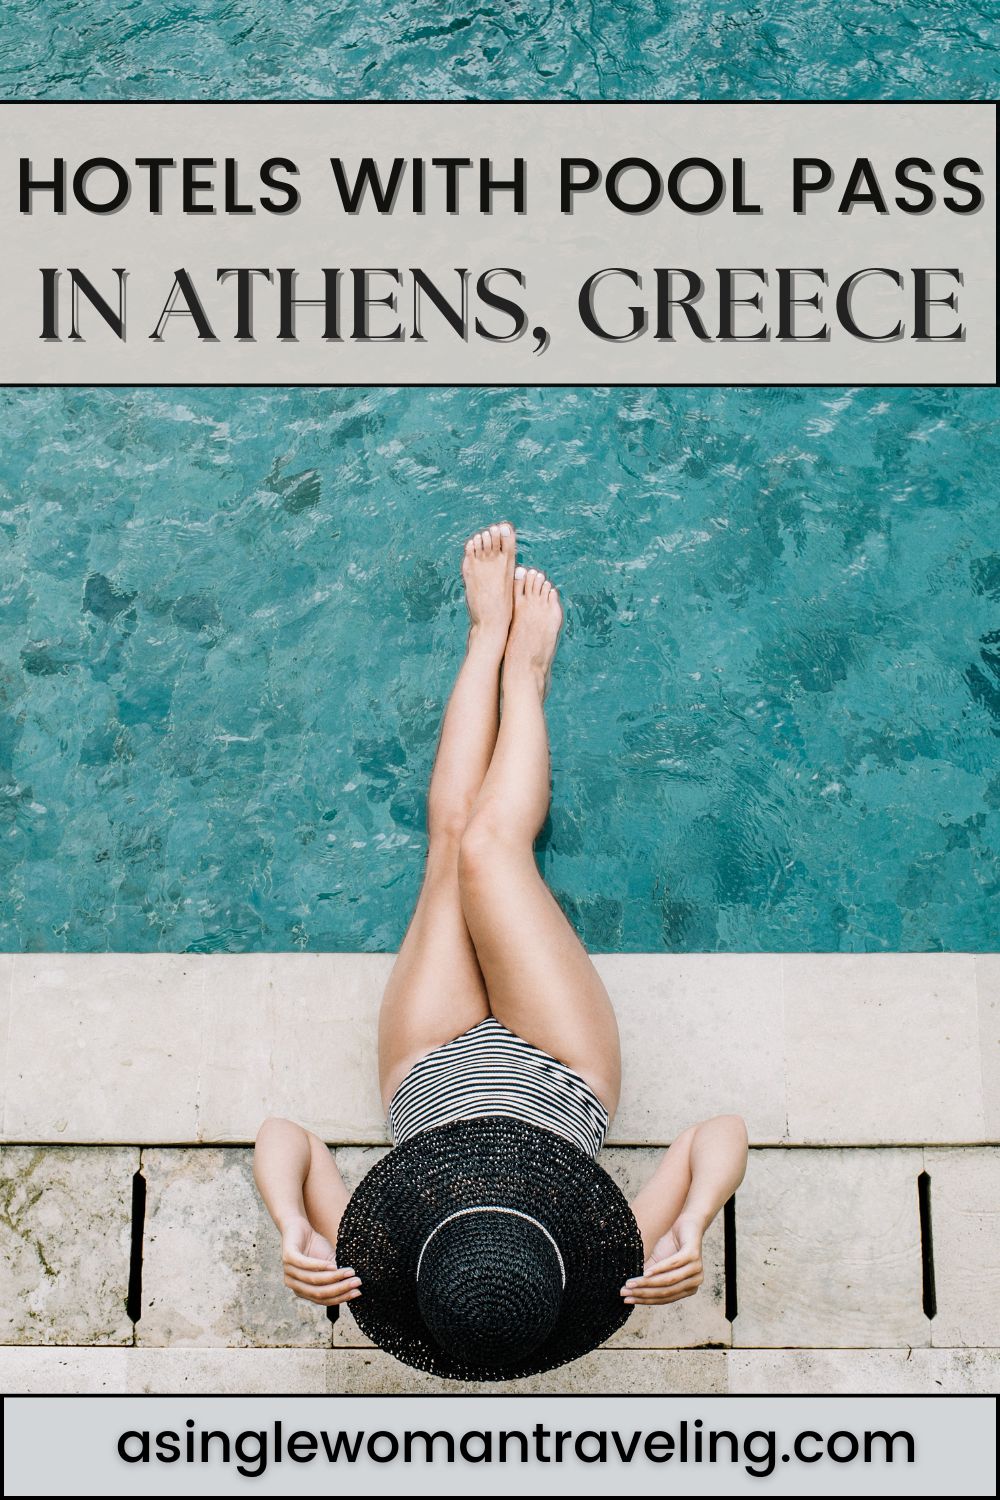 This is a promotional image for a travel blog focused on hotels with pool passes in Athens, Greece. The main part of the image features a woman lying on her back on a pool ledge, viewed from above, with her feet dipped into the clear blue water. She's wearing a black and white striped swimsuit and a wide-brimmed black hat, covering her face.